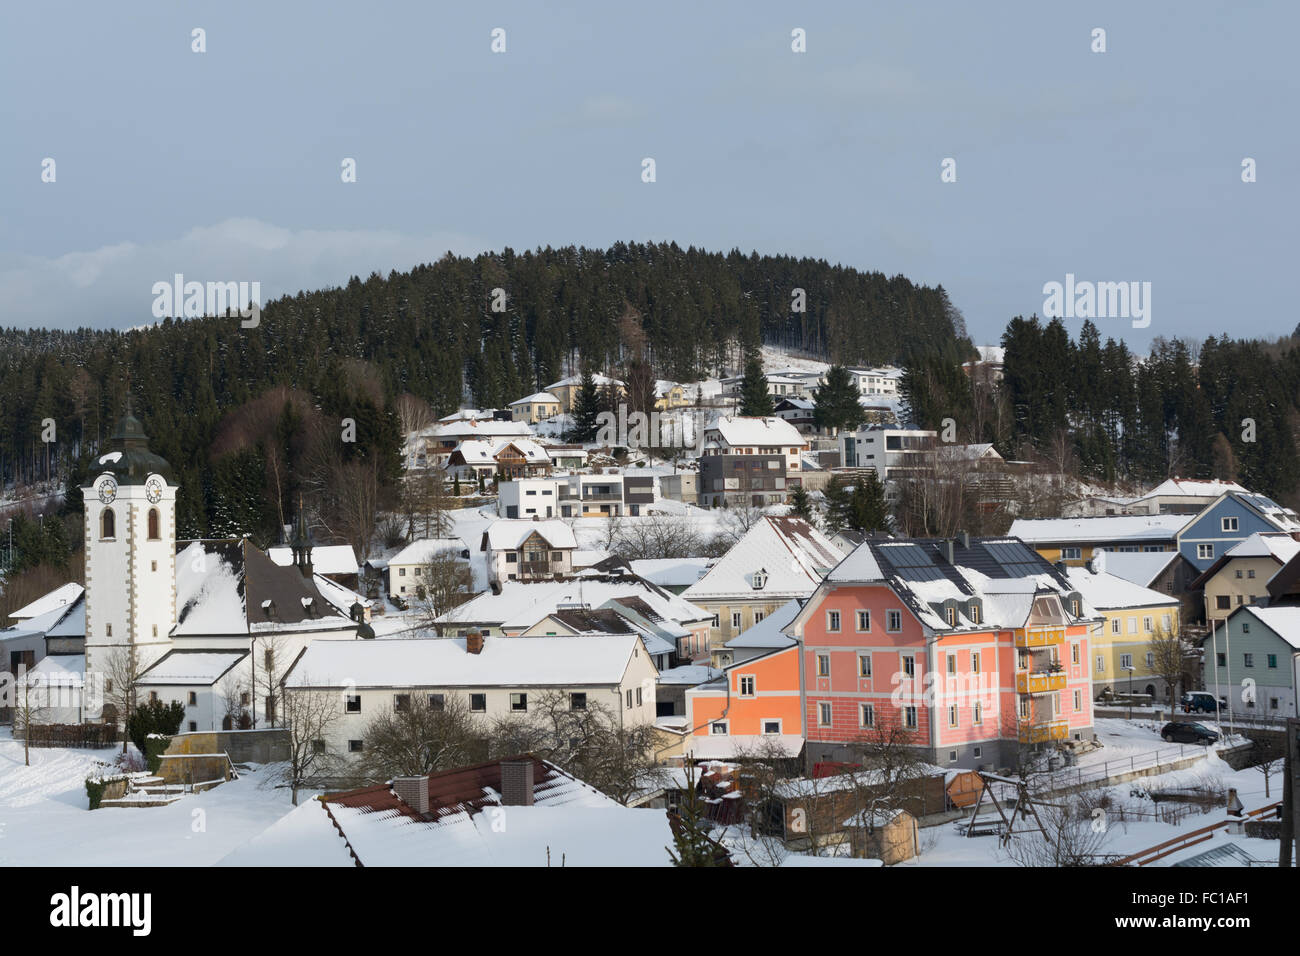 Snow covered rural community Vorderweissenbach Banque D'Images